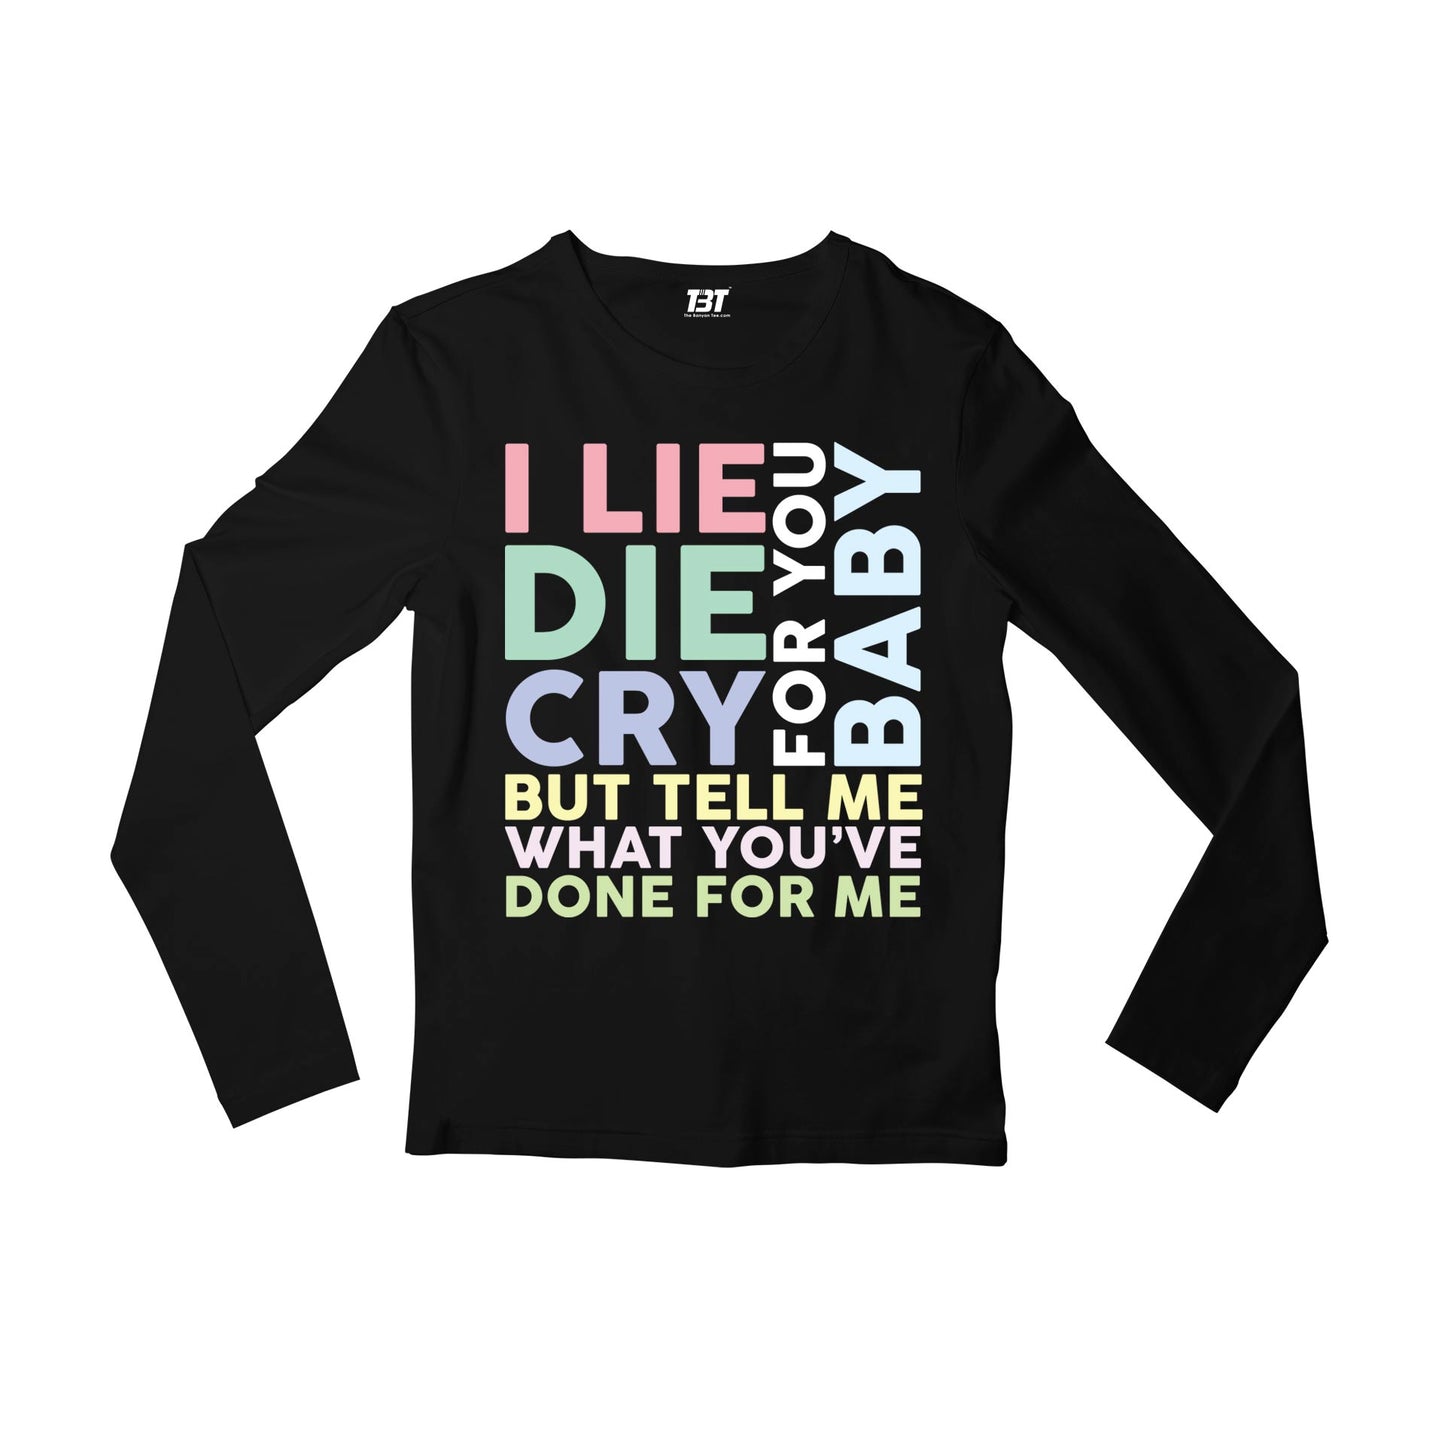 charlie puth done for me full sleeves long sleeves music band buy online india the banyan tee tbt men women girls boys unisex black i lie for you, baby die for you, baby cry for you, baby but tell me what you've done for me